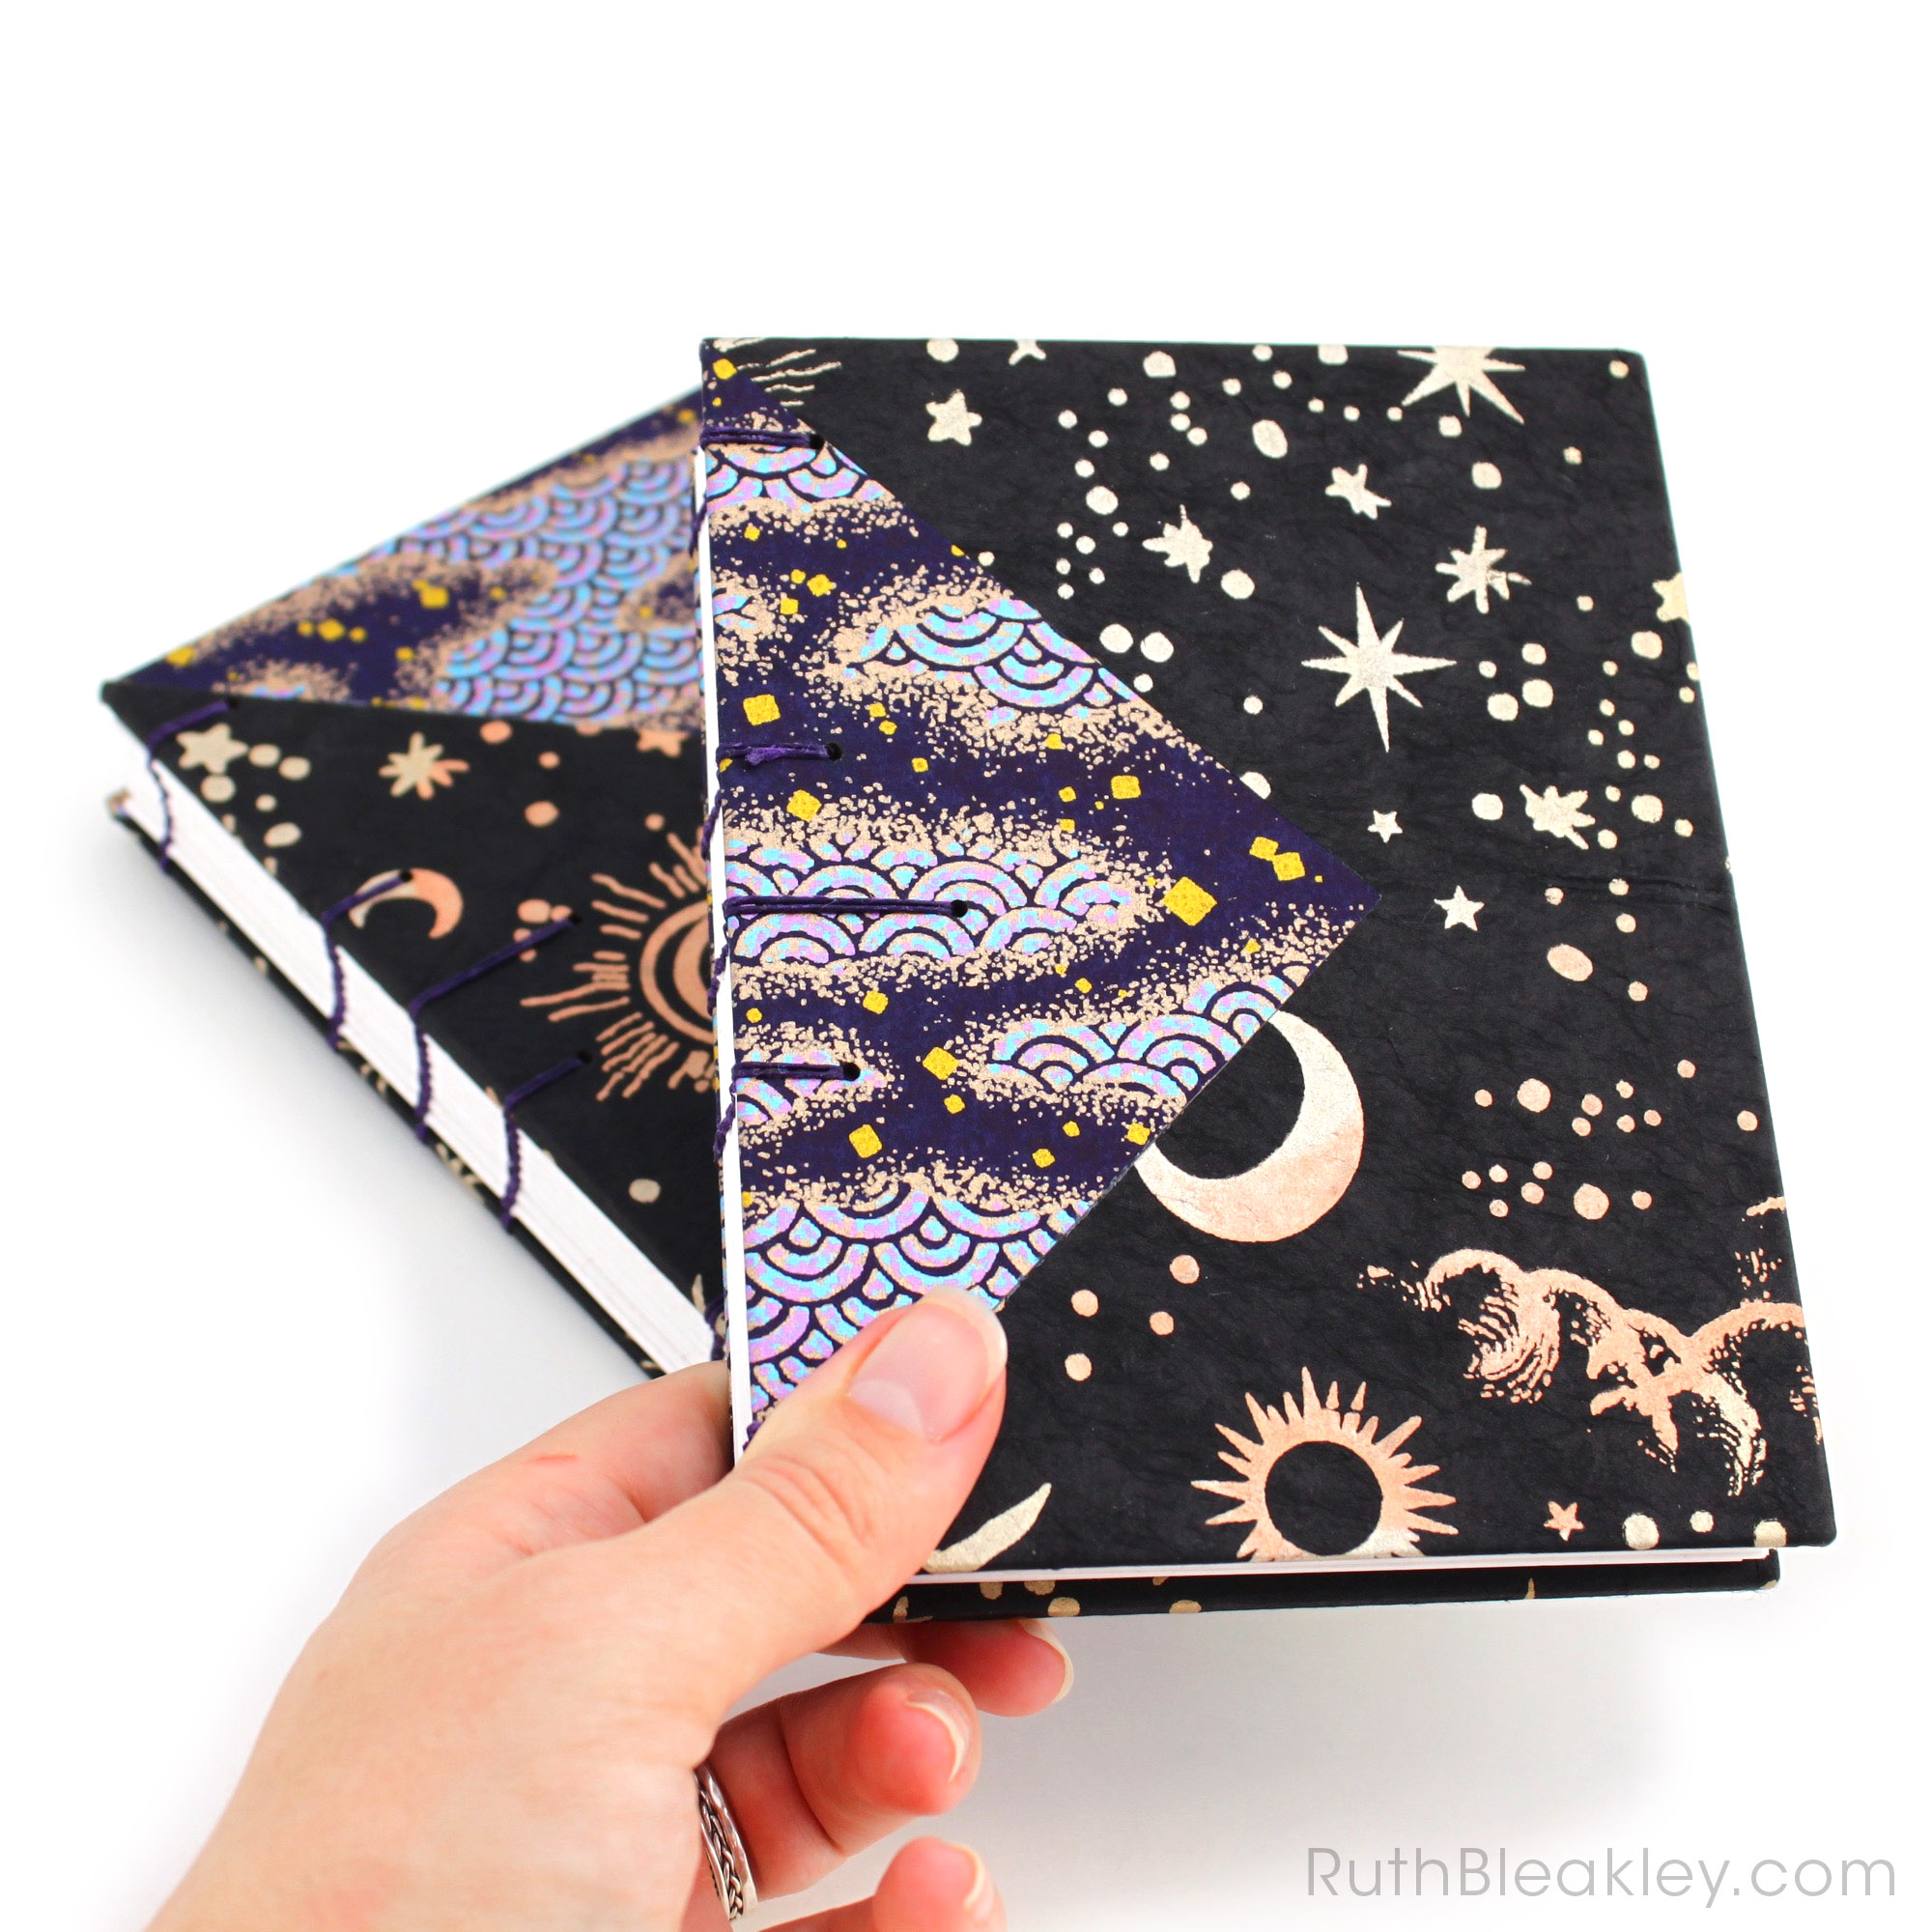 Two black and purple handmade journals by Ruth Bleakley with cosmic imagery